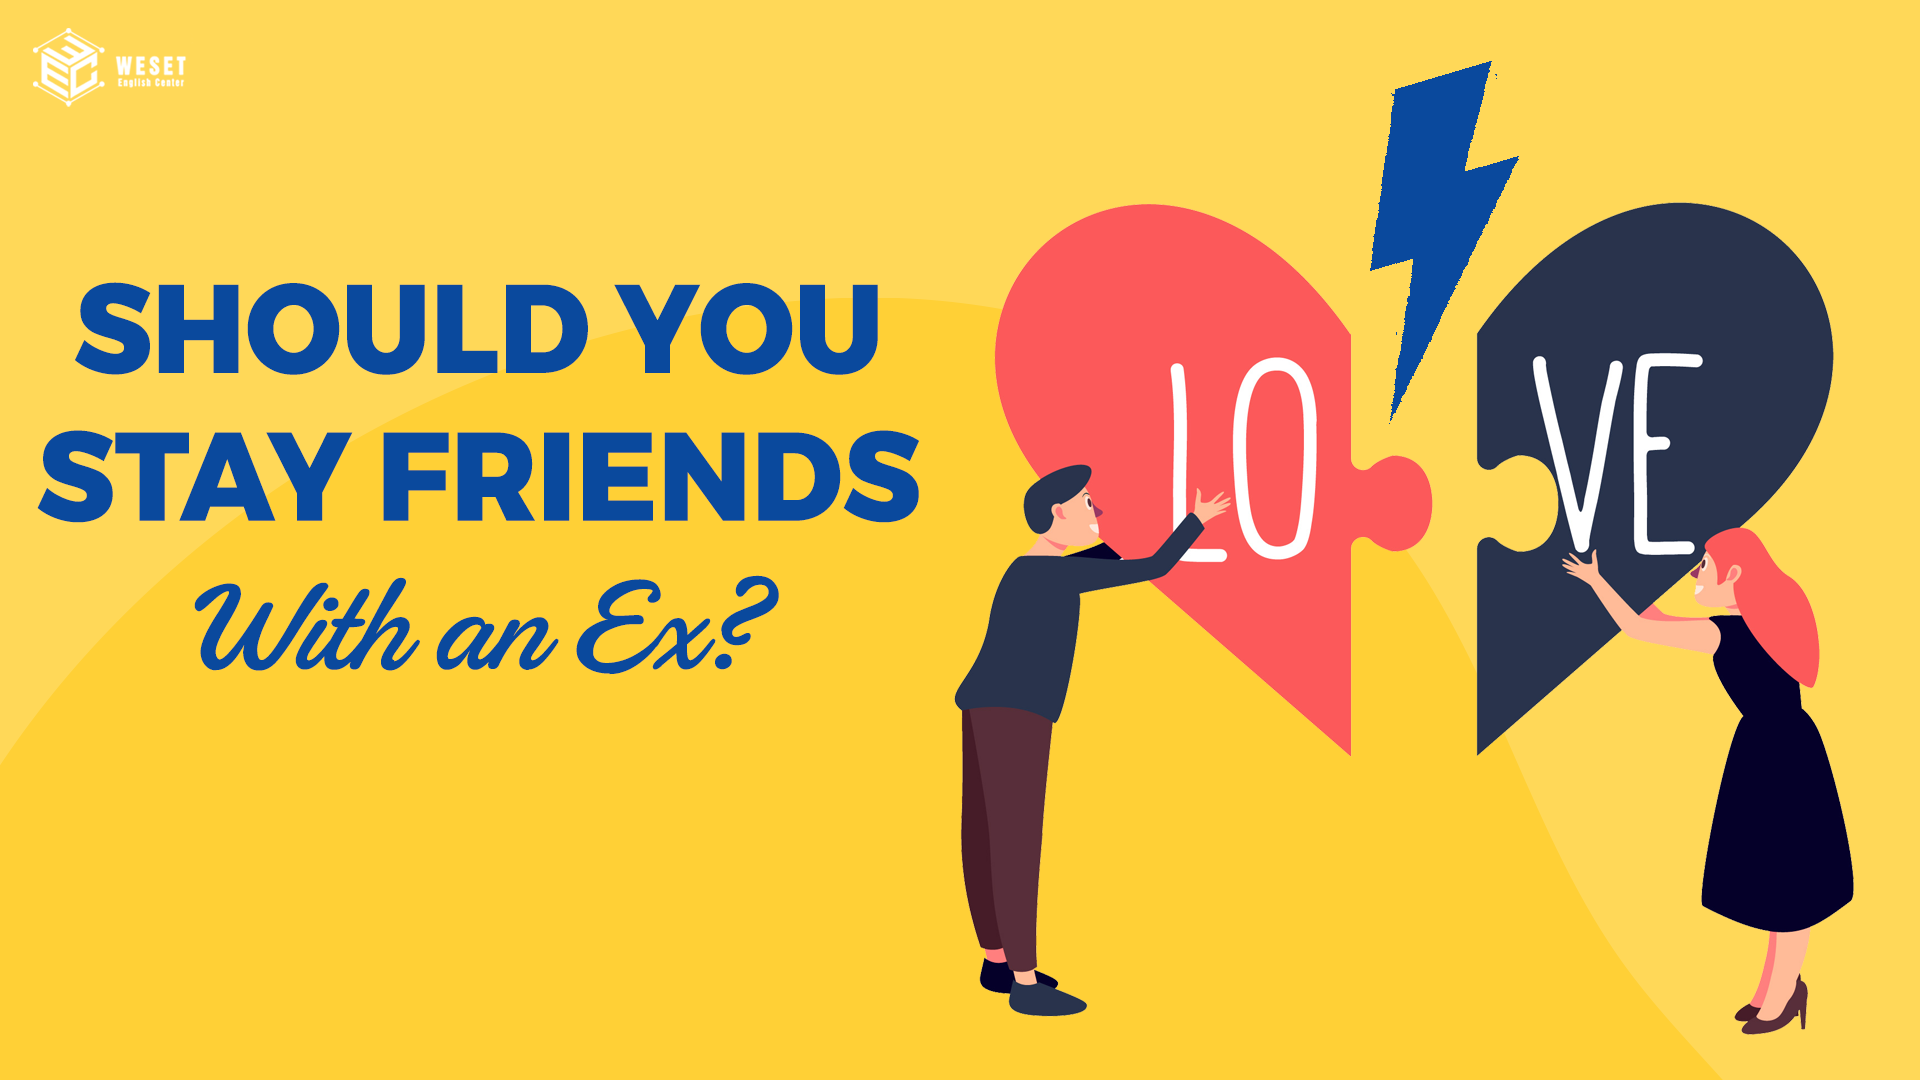 Reading for new vocabs - Should You Stay Friends With an Ex?